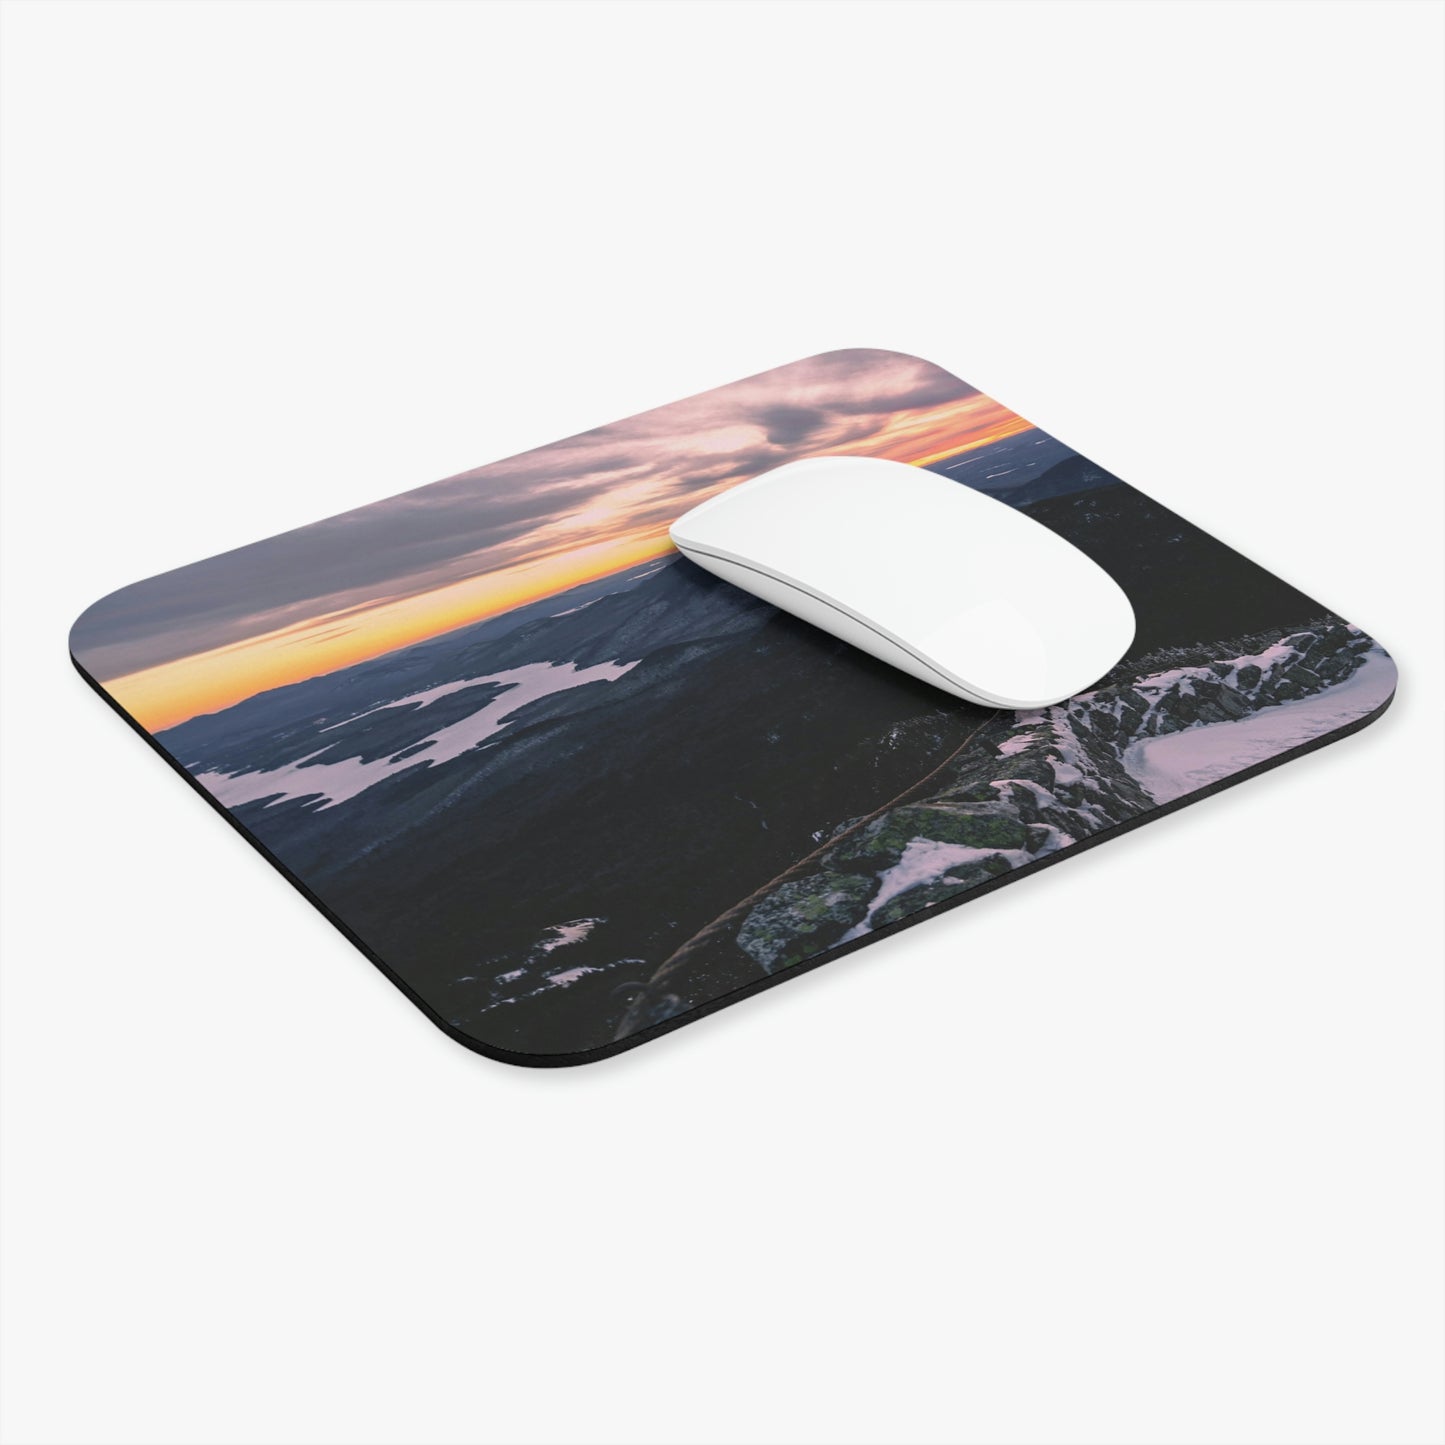 Whiteface Lake Placid View Mouse Pad